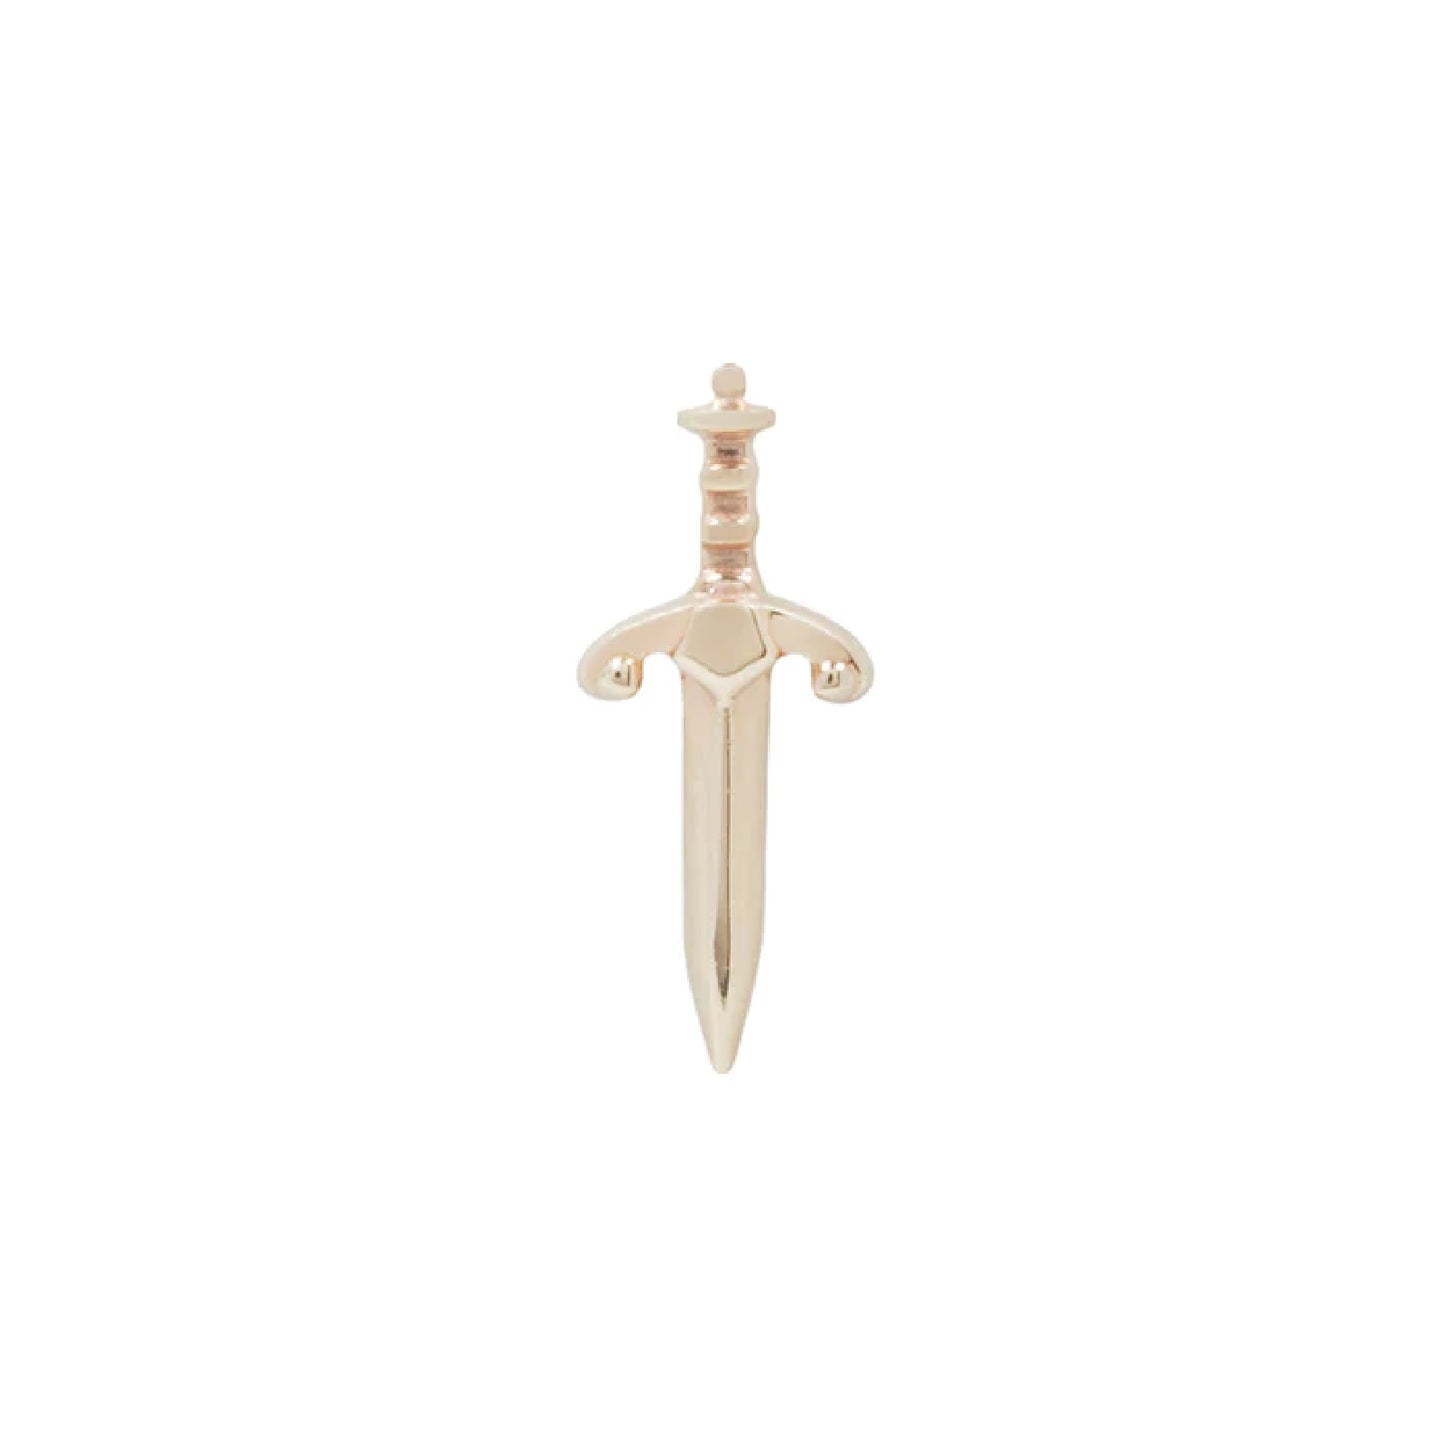 BUDDHA JEWELRY - BLADE - SWORD - 14KT SOLID GOLD - THREADLESS END